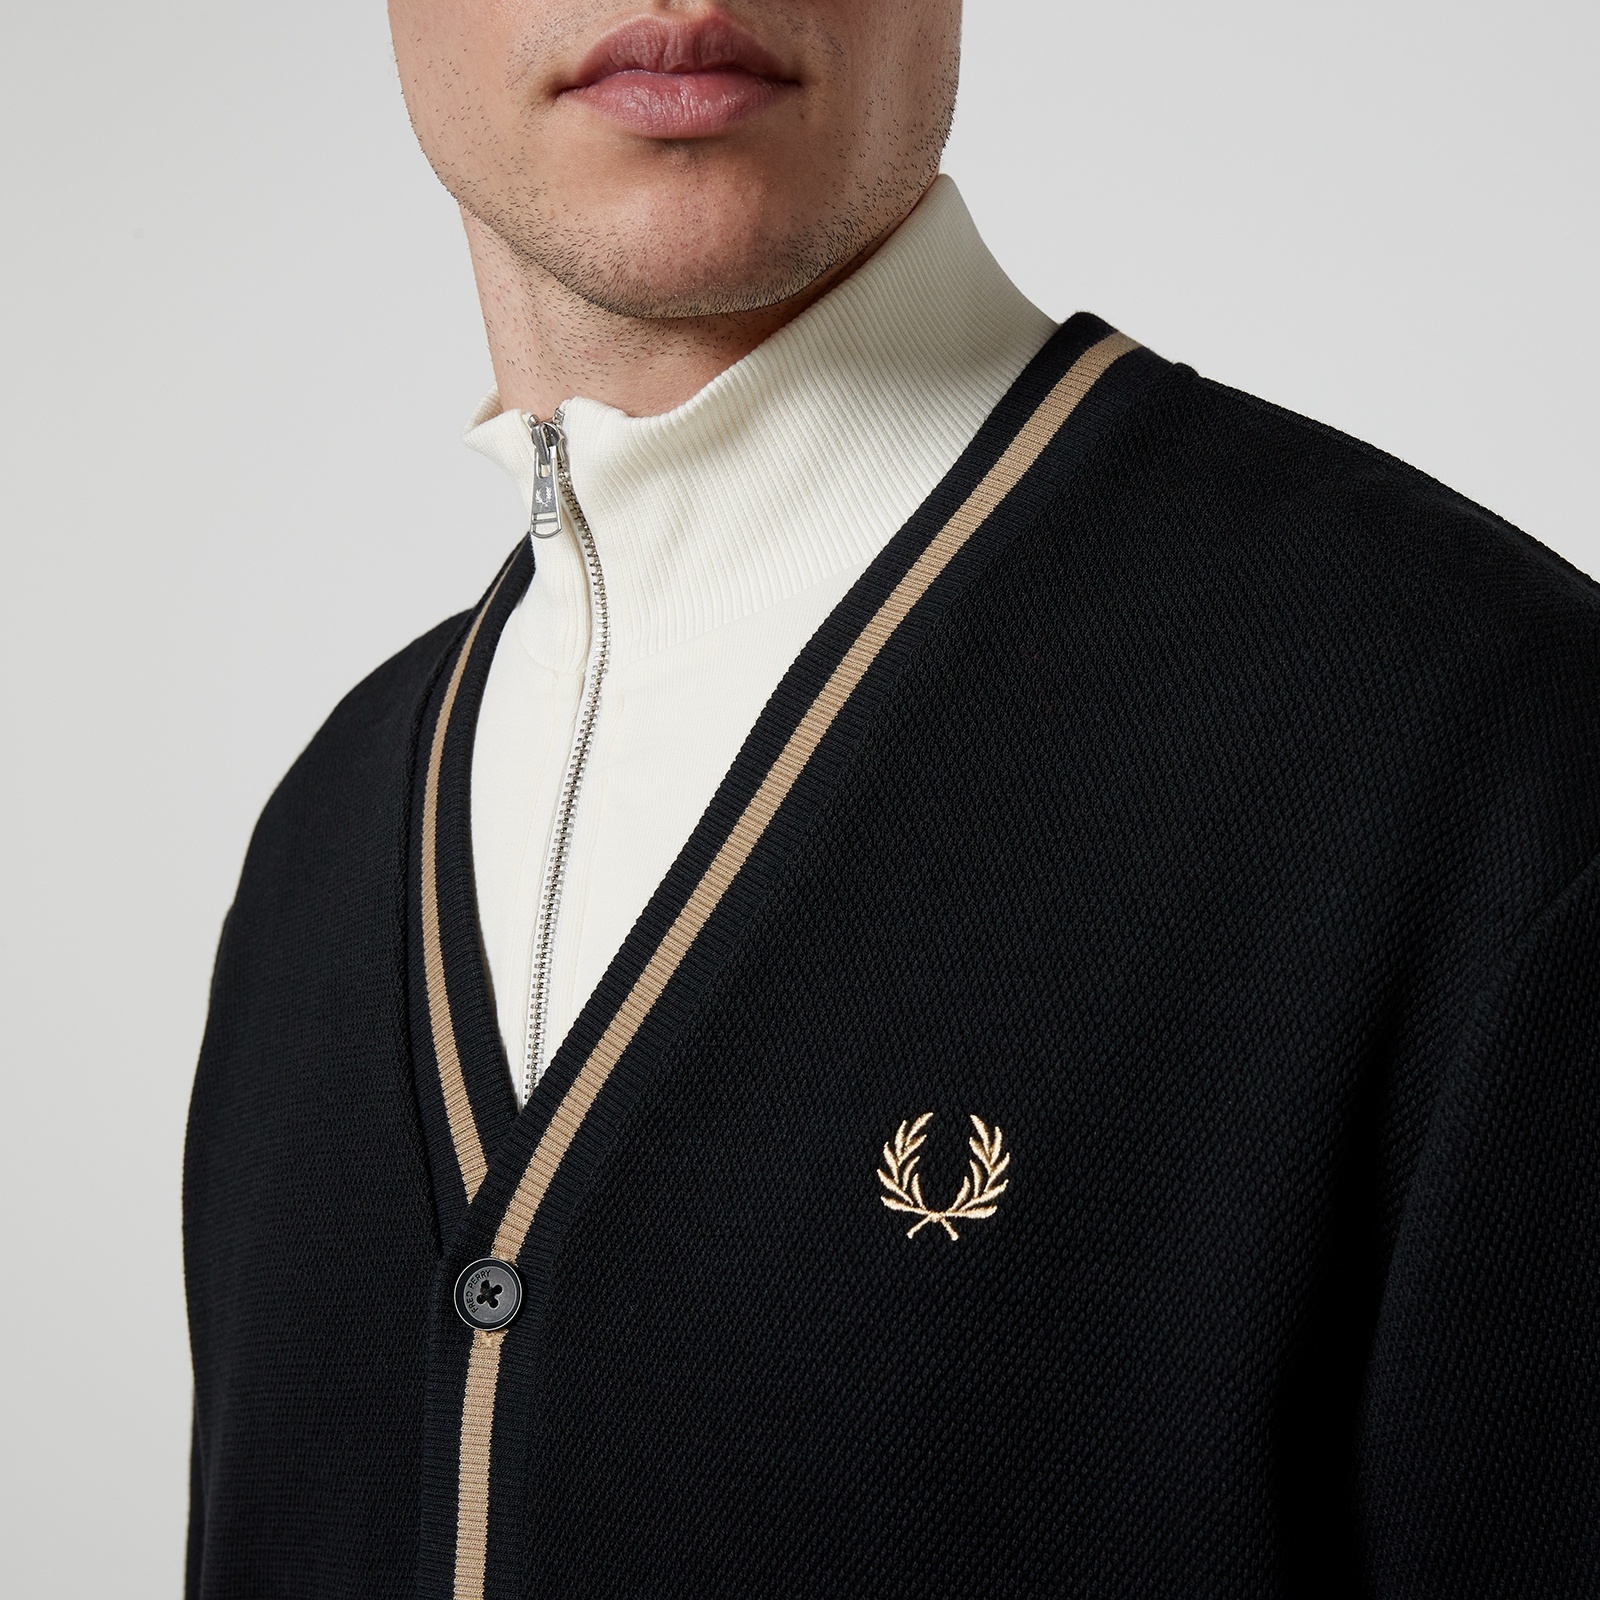 Fred Perry Men's Tipped Pique Cardigan - Black/Warm Stone - 4